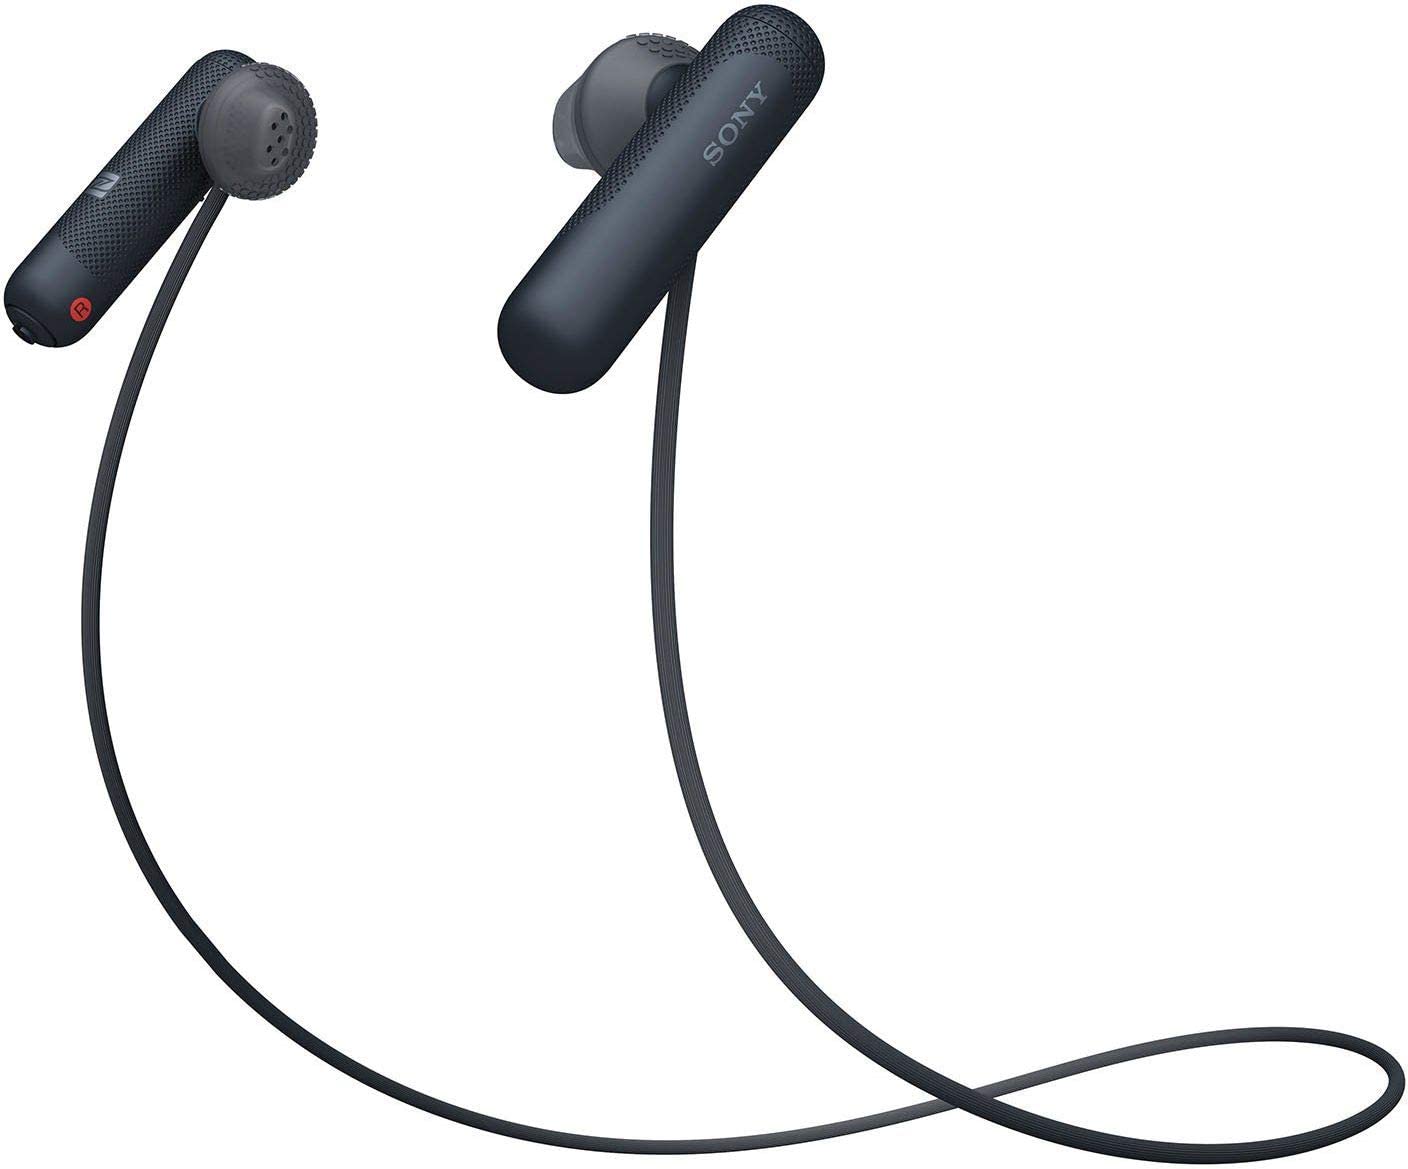 Sony Sports In-ear Headphones, Bluetooth, Nfc, Splash-proof and sweat-proof, WI-SP500